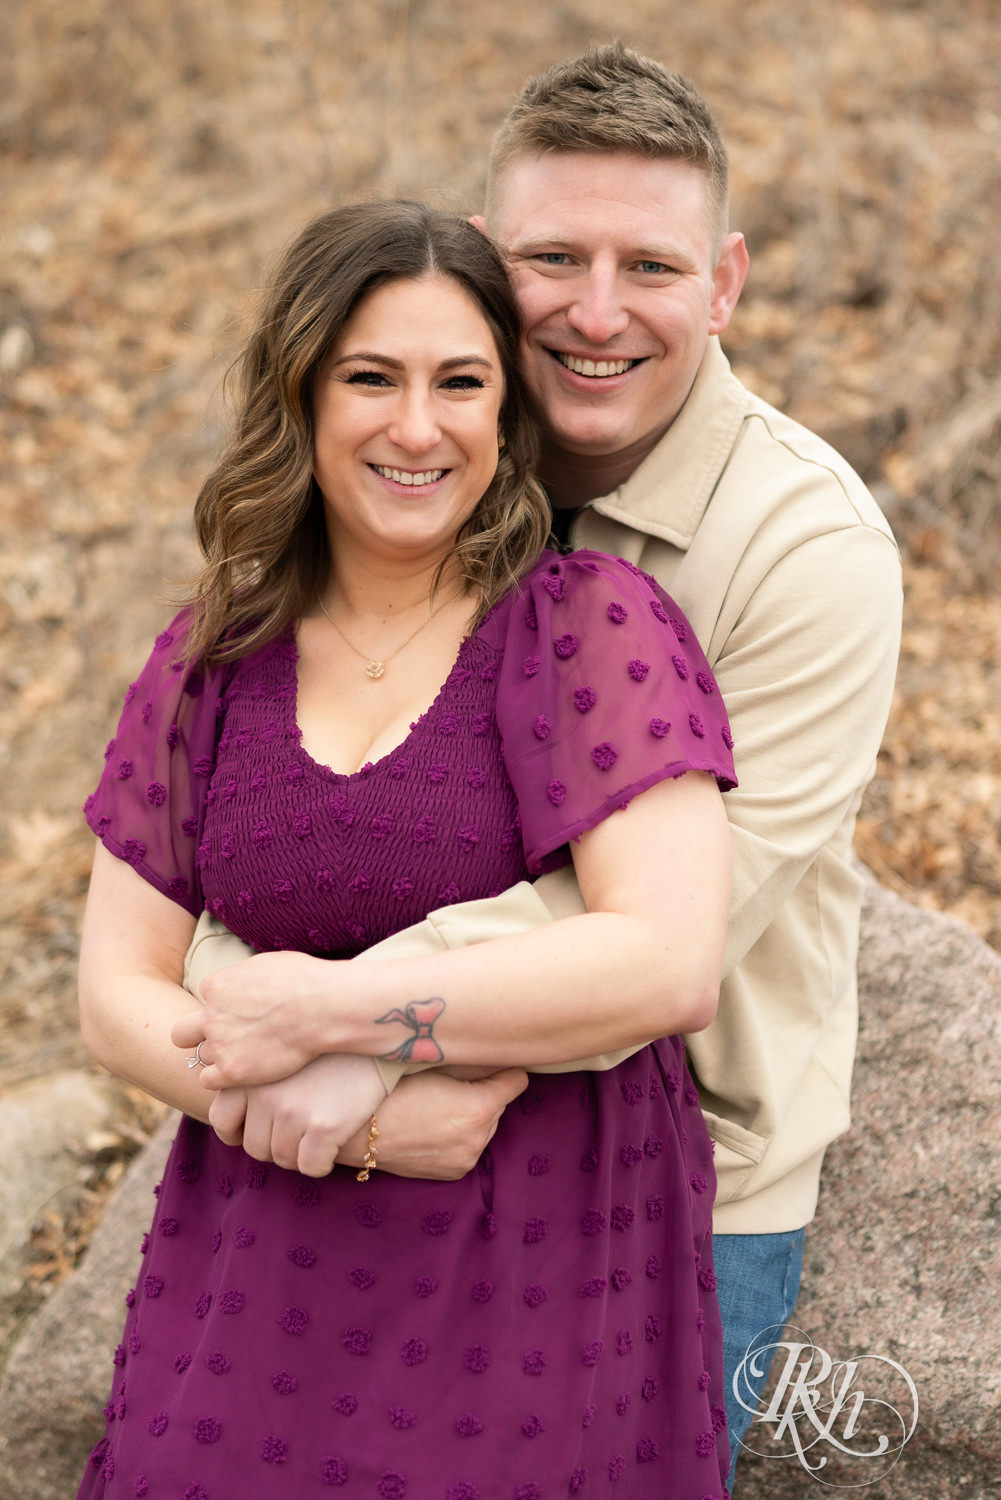 Man in jeans and woman in magenta dress smile during March engagement photography in Eagan, Minnesota.